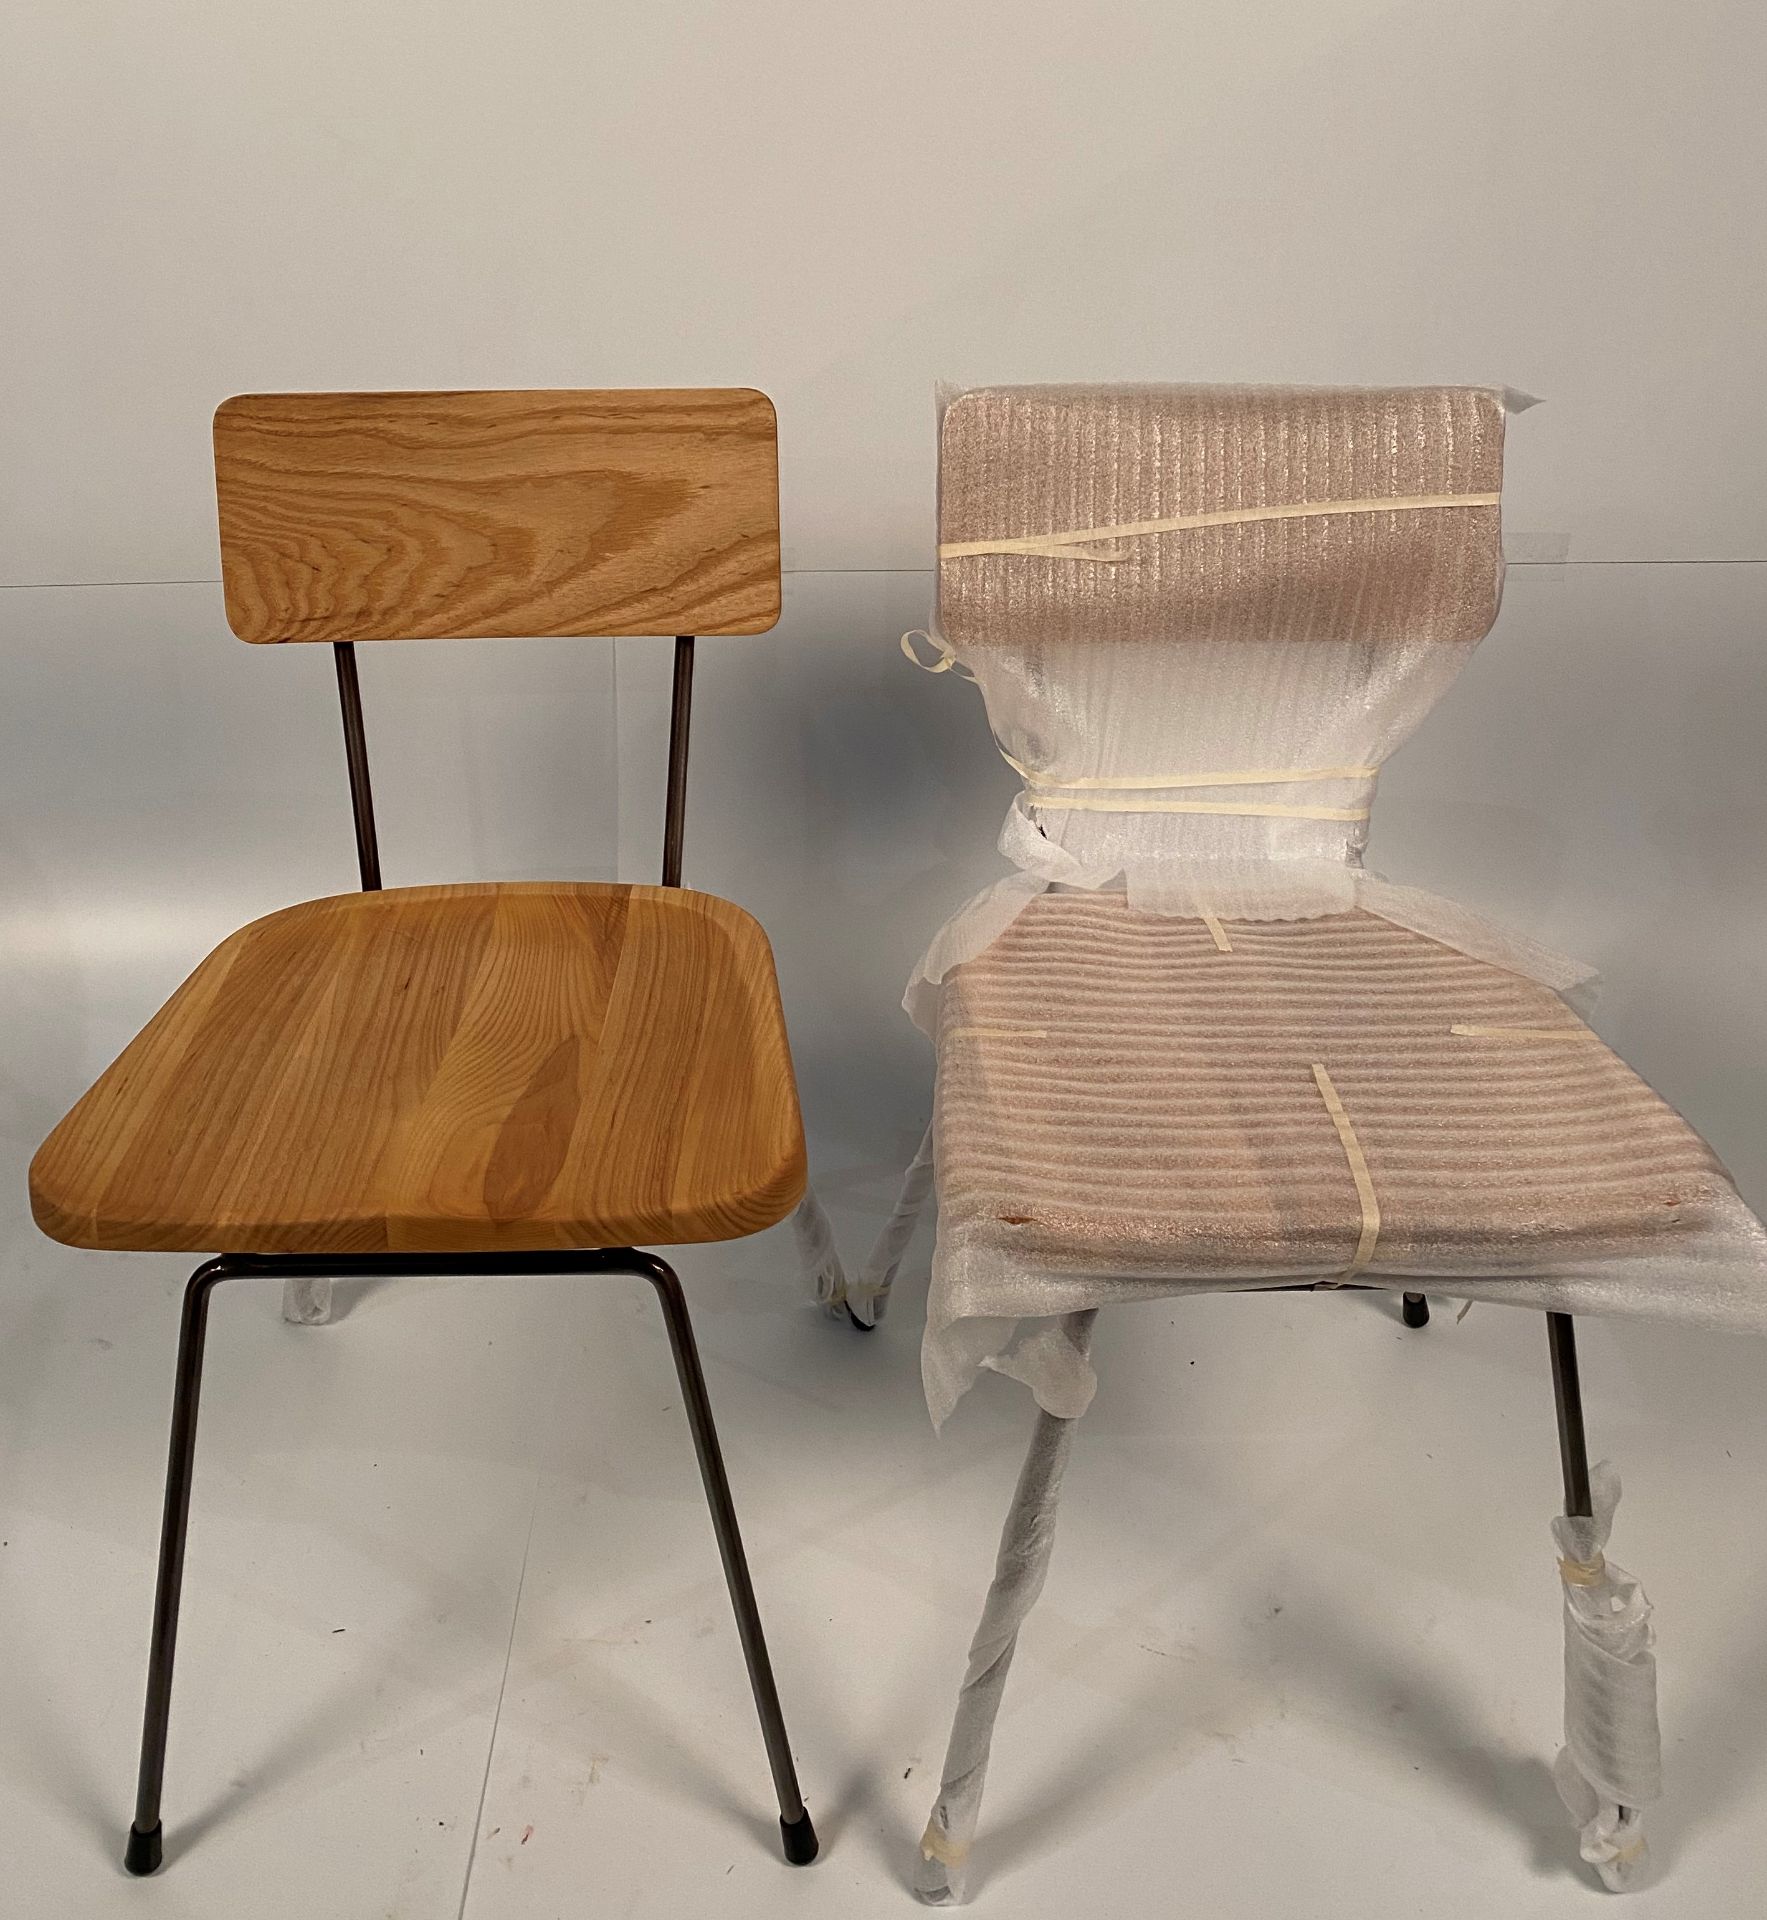 4 x College wooden chairs with metal frames